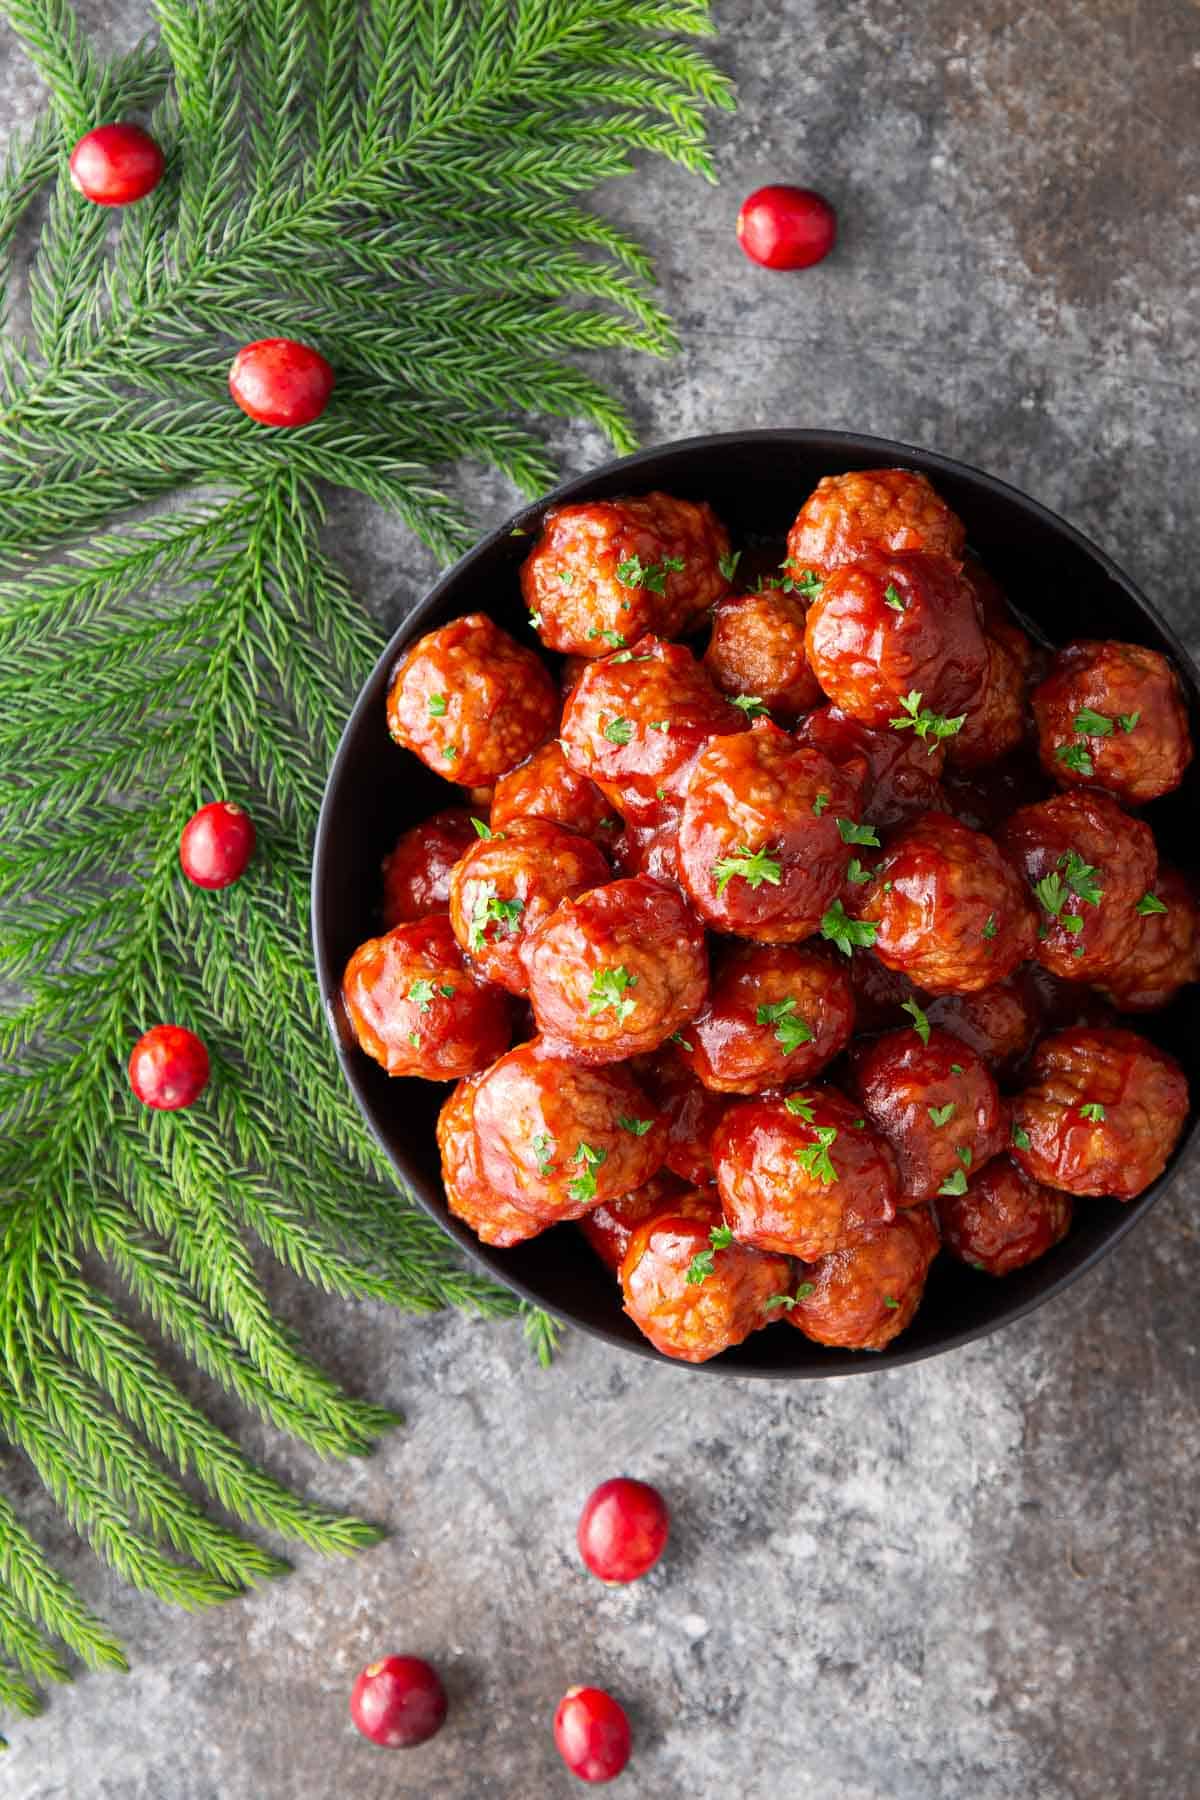 Overhead view of cranberry meatballs in a black bowl beside festive greenery and fresh cranberries.